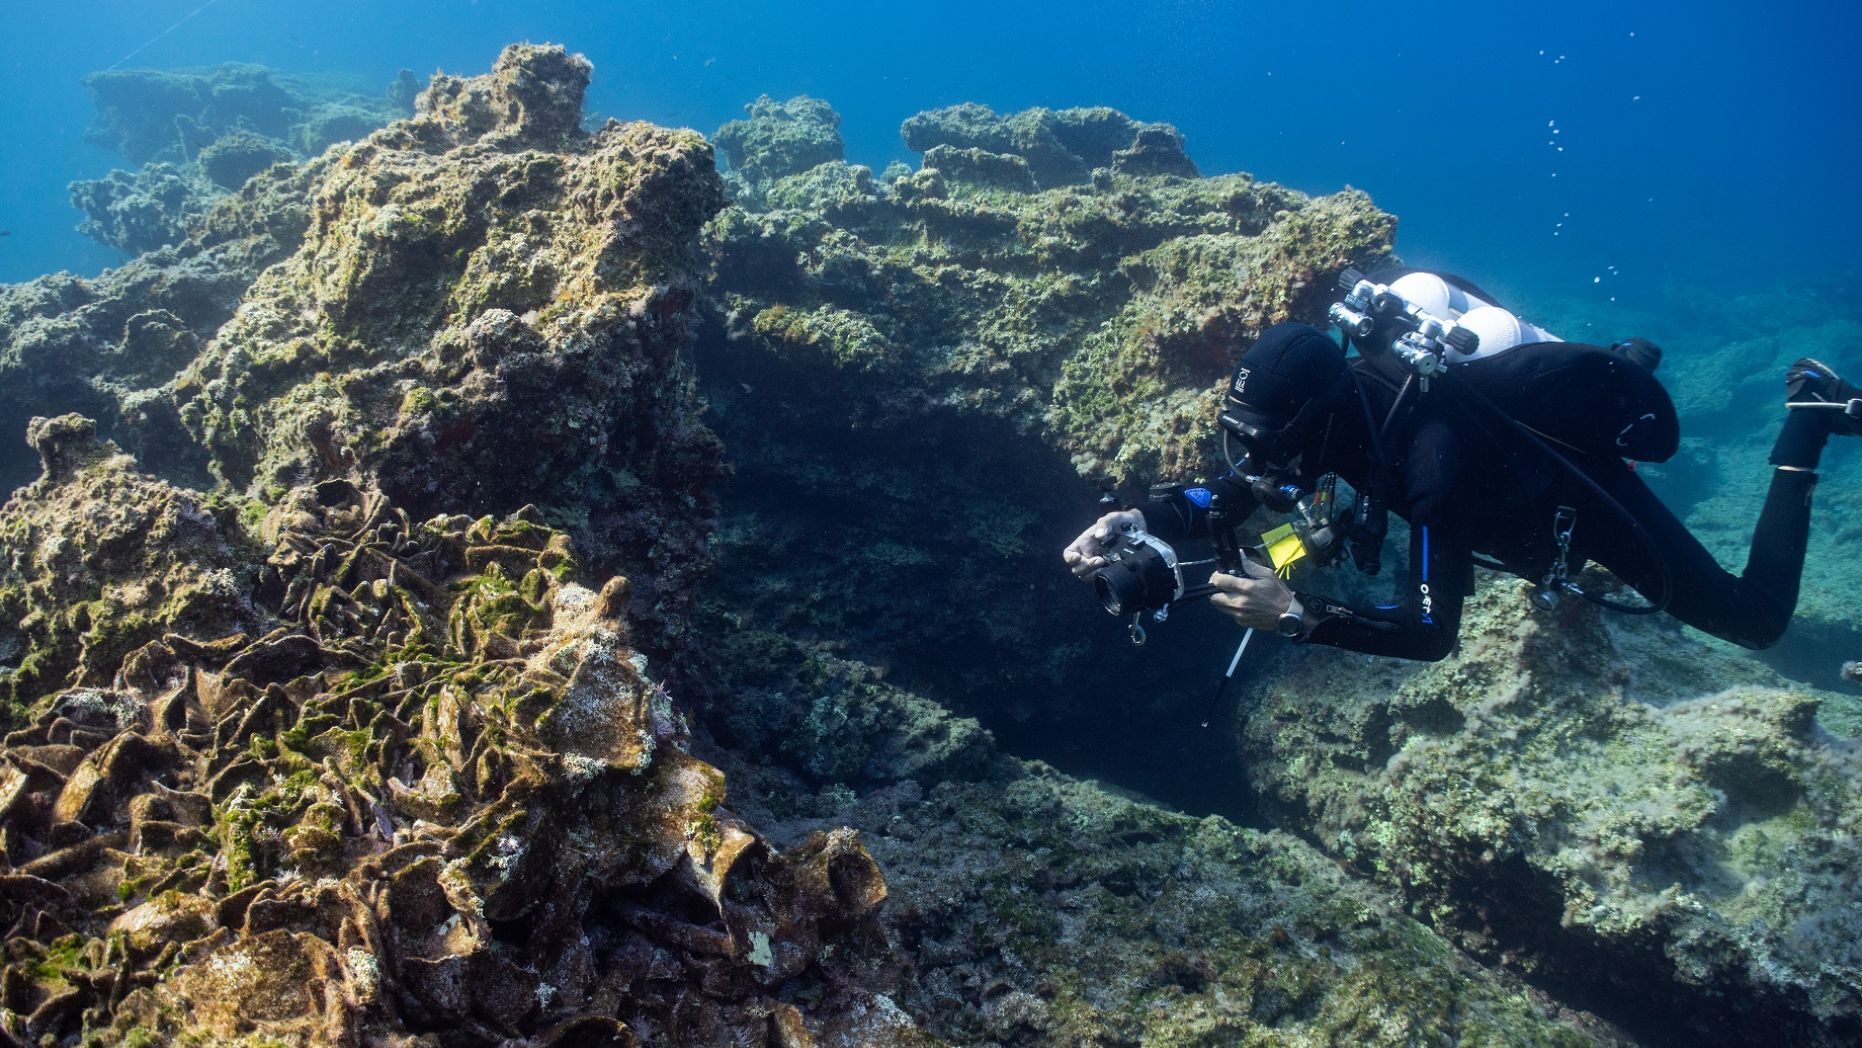 Shipwrecks with Stone Pyramid Anchors, Discovered Off Greece